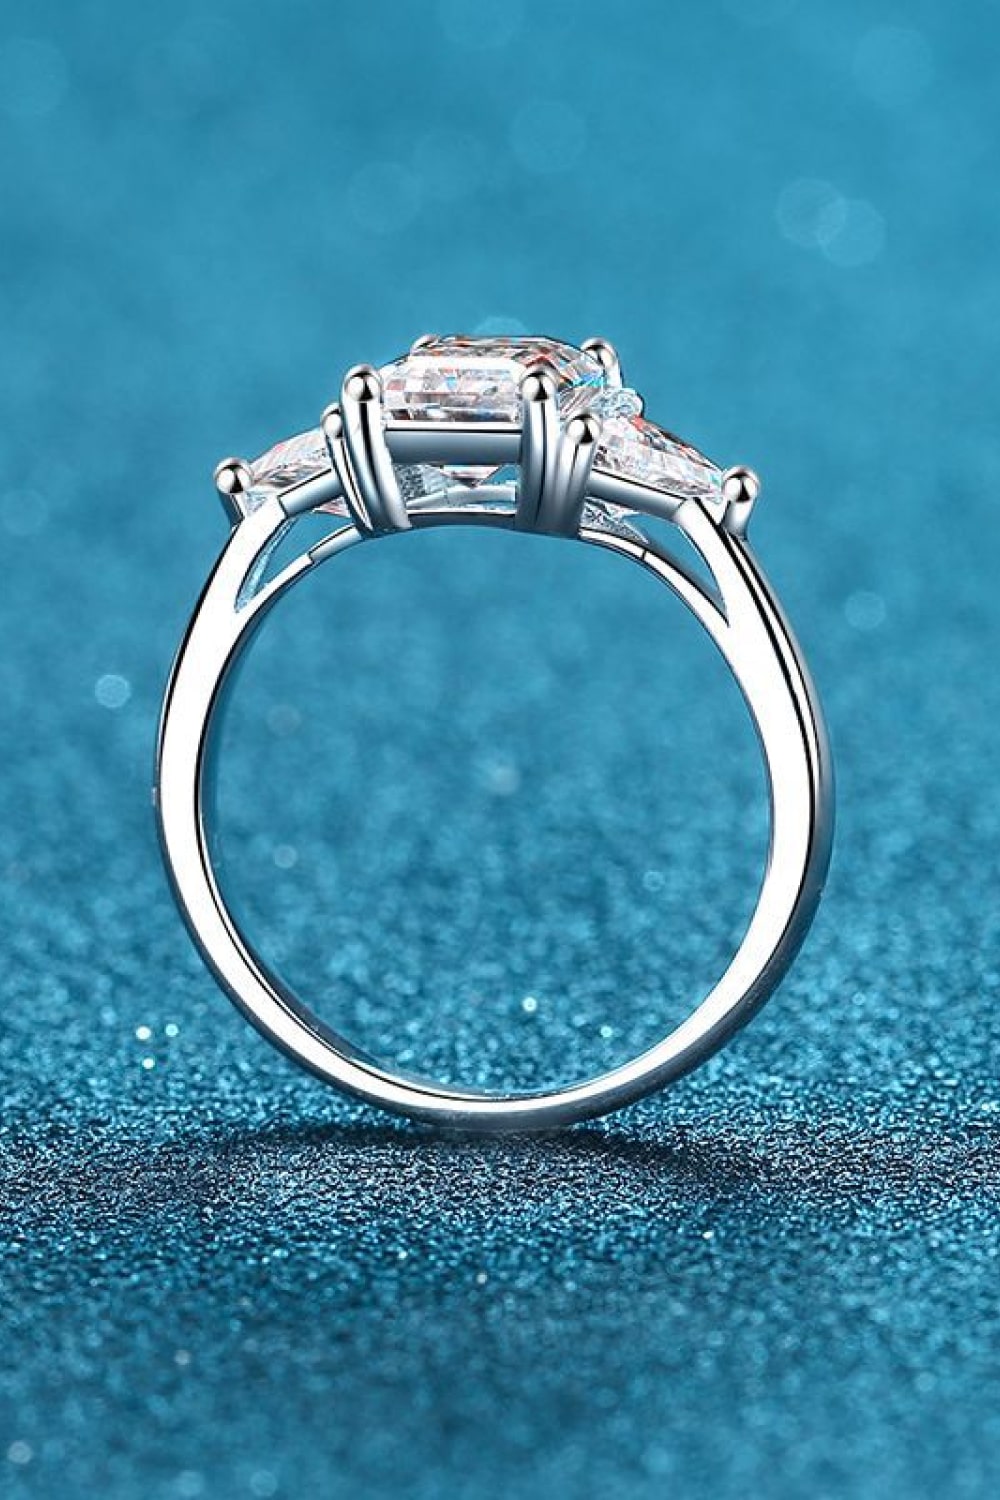 Moissanite 925 Sterling Silver Rhodium-Plated Ring Image4